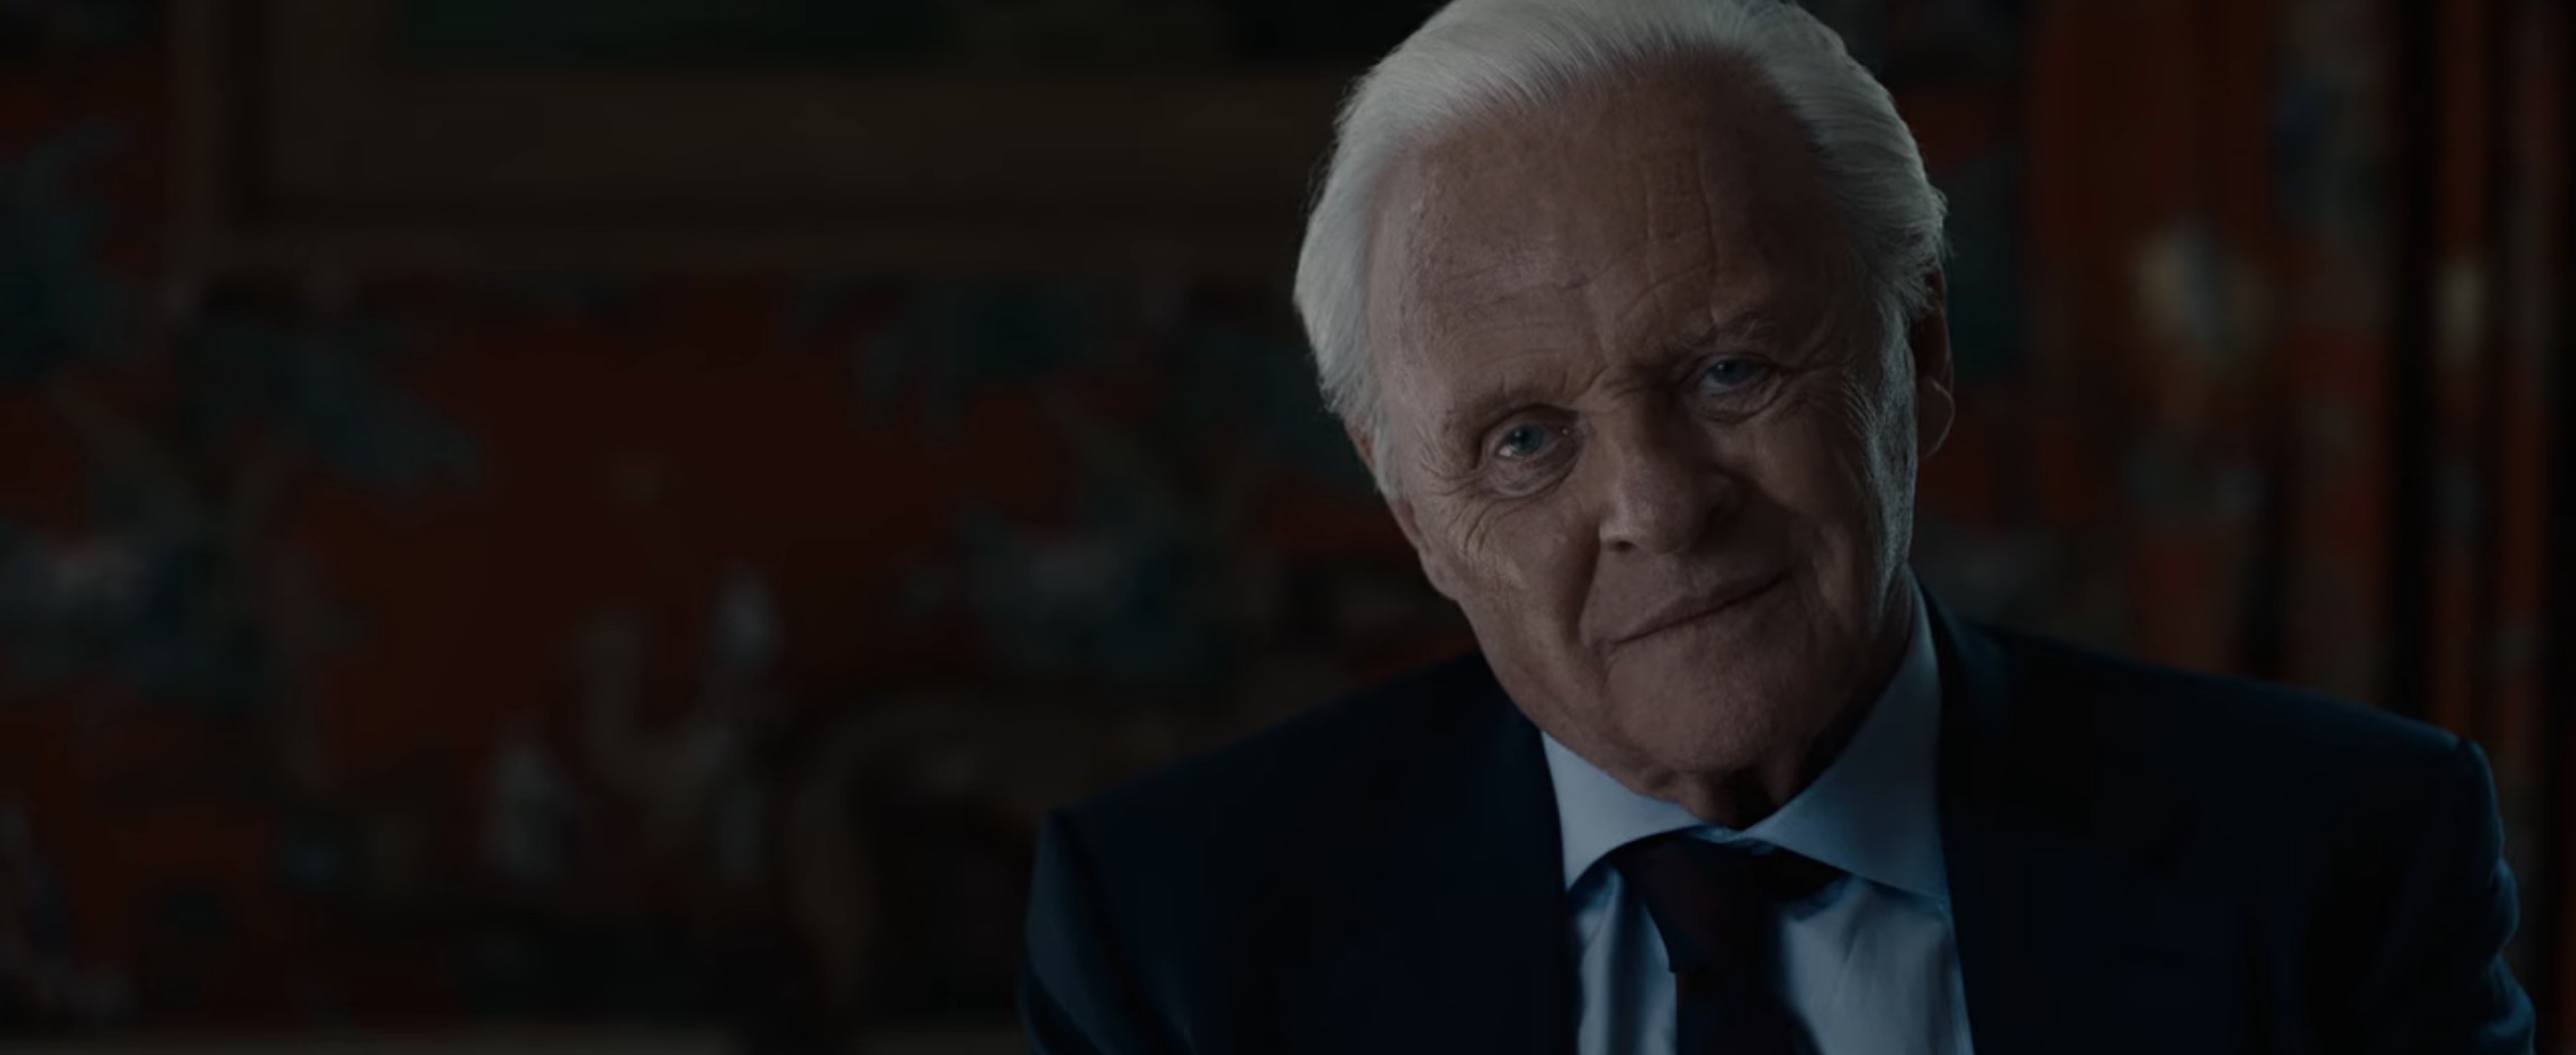 The Son Cast on Netflix - Anthony Hopkins as Anthony Miller